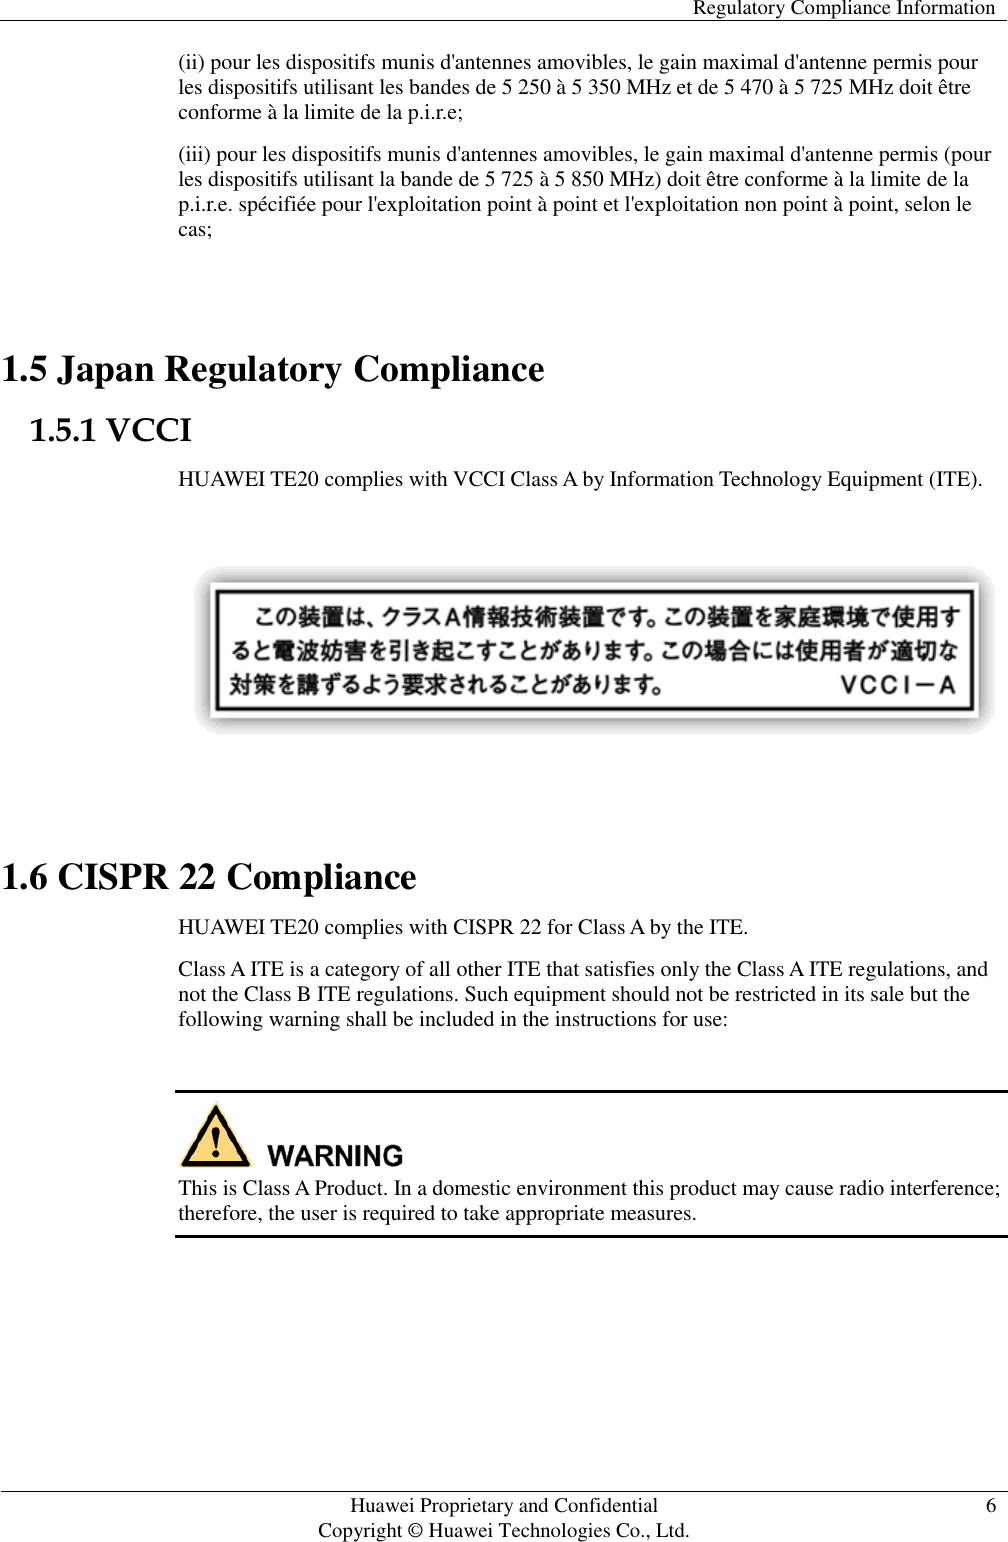   Regulatory Compliance Information   Huawei Proprietary and Confidential                                     Copyright © Huawei Technologies Co., Ltd. 6  (ii) pour les dispositifs munis d&apos;antennes amovibles, le gain maximal d&apos;antenne permis pour les dispositifs utilisant les bandes de 5 250 à 5 350 MHz et de 5 470 à 5 725 MHz doit être conforme à la limite de la p.i.r.e; (iii) pour les dispositifs munis d&apos;antennes amovibles, le gain maximal d&apos;antenne permis (pour les dispositifs utilisant la bande de 5 725 à 5 850 MHz) doit être conforme à la limite de la p.i.r.e. spécifiée pour l&apos;exploitation point à point et l&apos;exploitation non point à point, selon le cas;  1.5 Japan Regulatory Compliance 1.5.1 VCCI HUAWEI TE20 complies with VCCI Class A by Information Technology Equipment (ITE).    1.6 CISPR 22 Compliance HUAWEI TE20 complies with CISPR 22 for Class A by the ITE. Class A ITE is a category of all other ITE that satisfies only the Class A ITE regulations, and not the Class B ITE regulations. Such equipment should not be restricted in its sale but the following warning shall be included in the instructions for use:   This is Class A Product. In a domestic environment this product may cause radio interference; therefore, the user is required to take appropriate measures.  